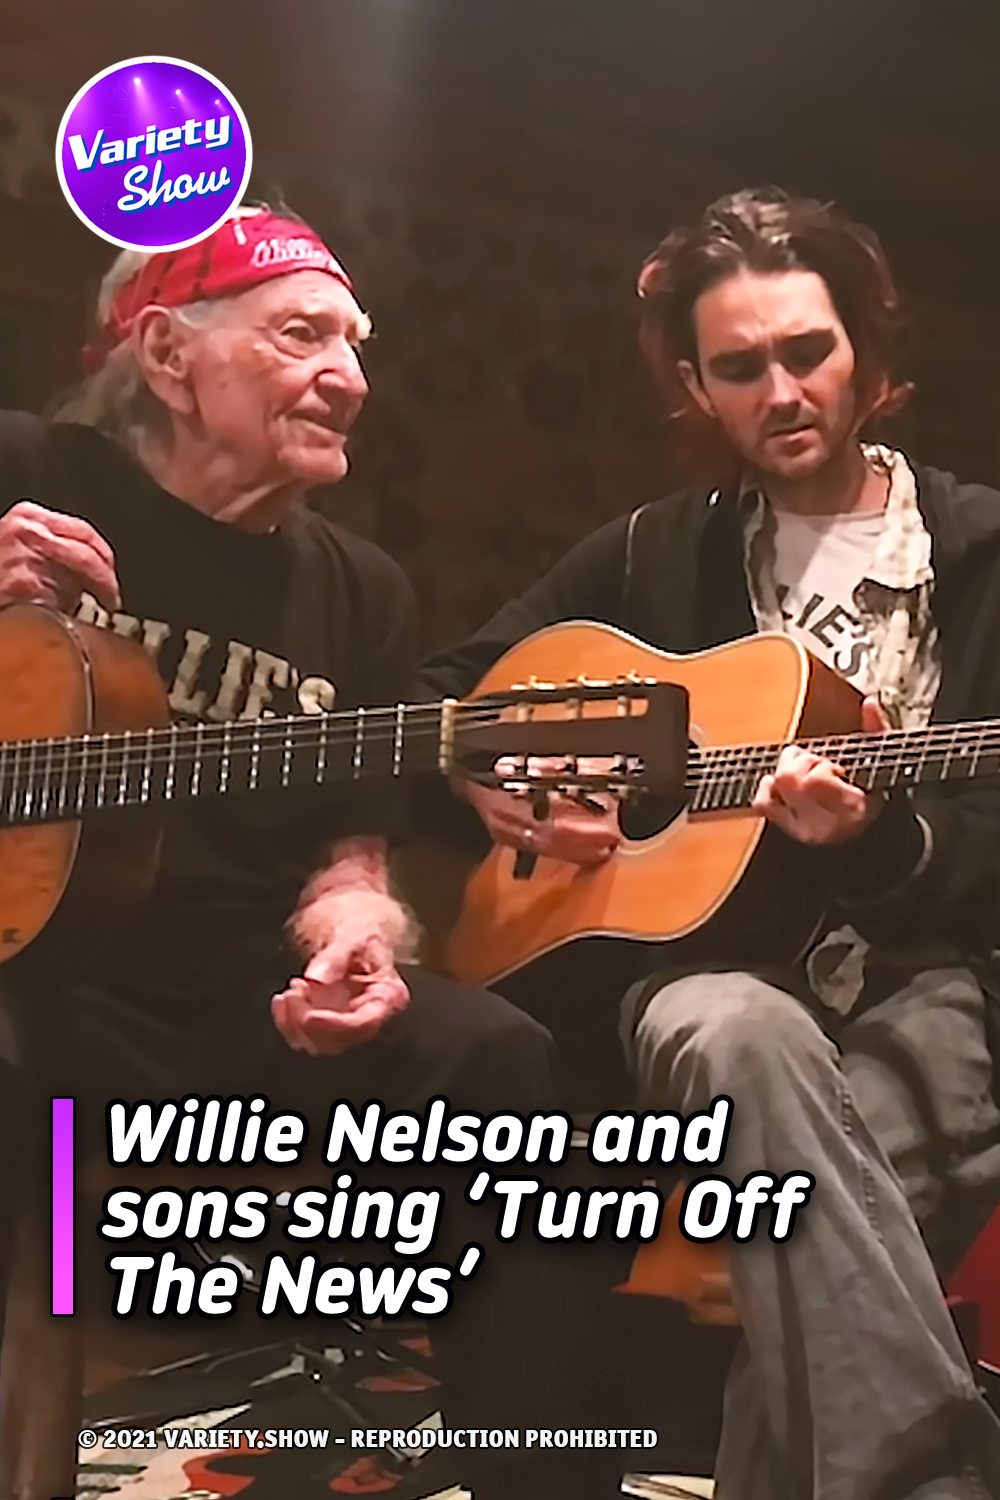 Willie Nelson and sons sing ‘Turn Off The News’